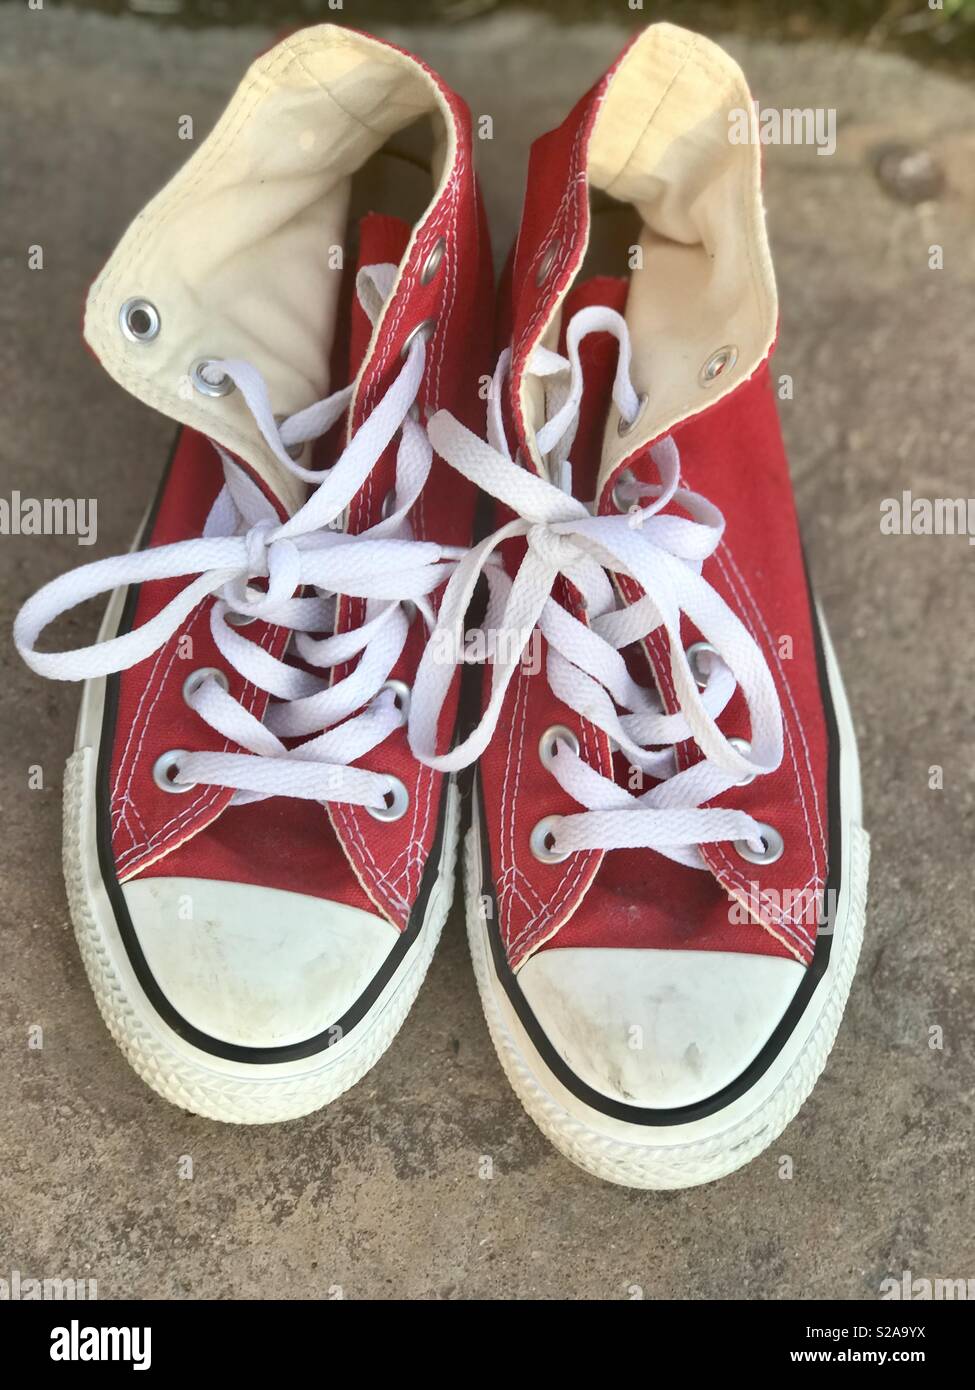 Converse Shoes High Resolution Stock Photography and Images - Alamy